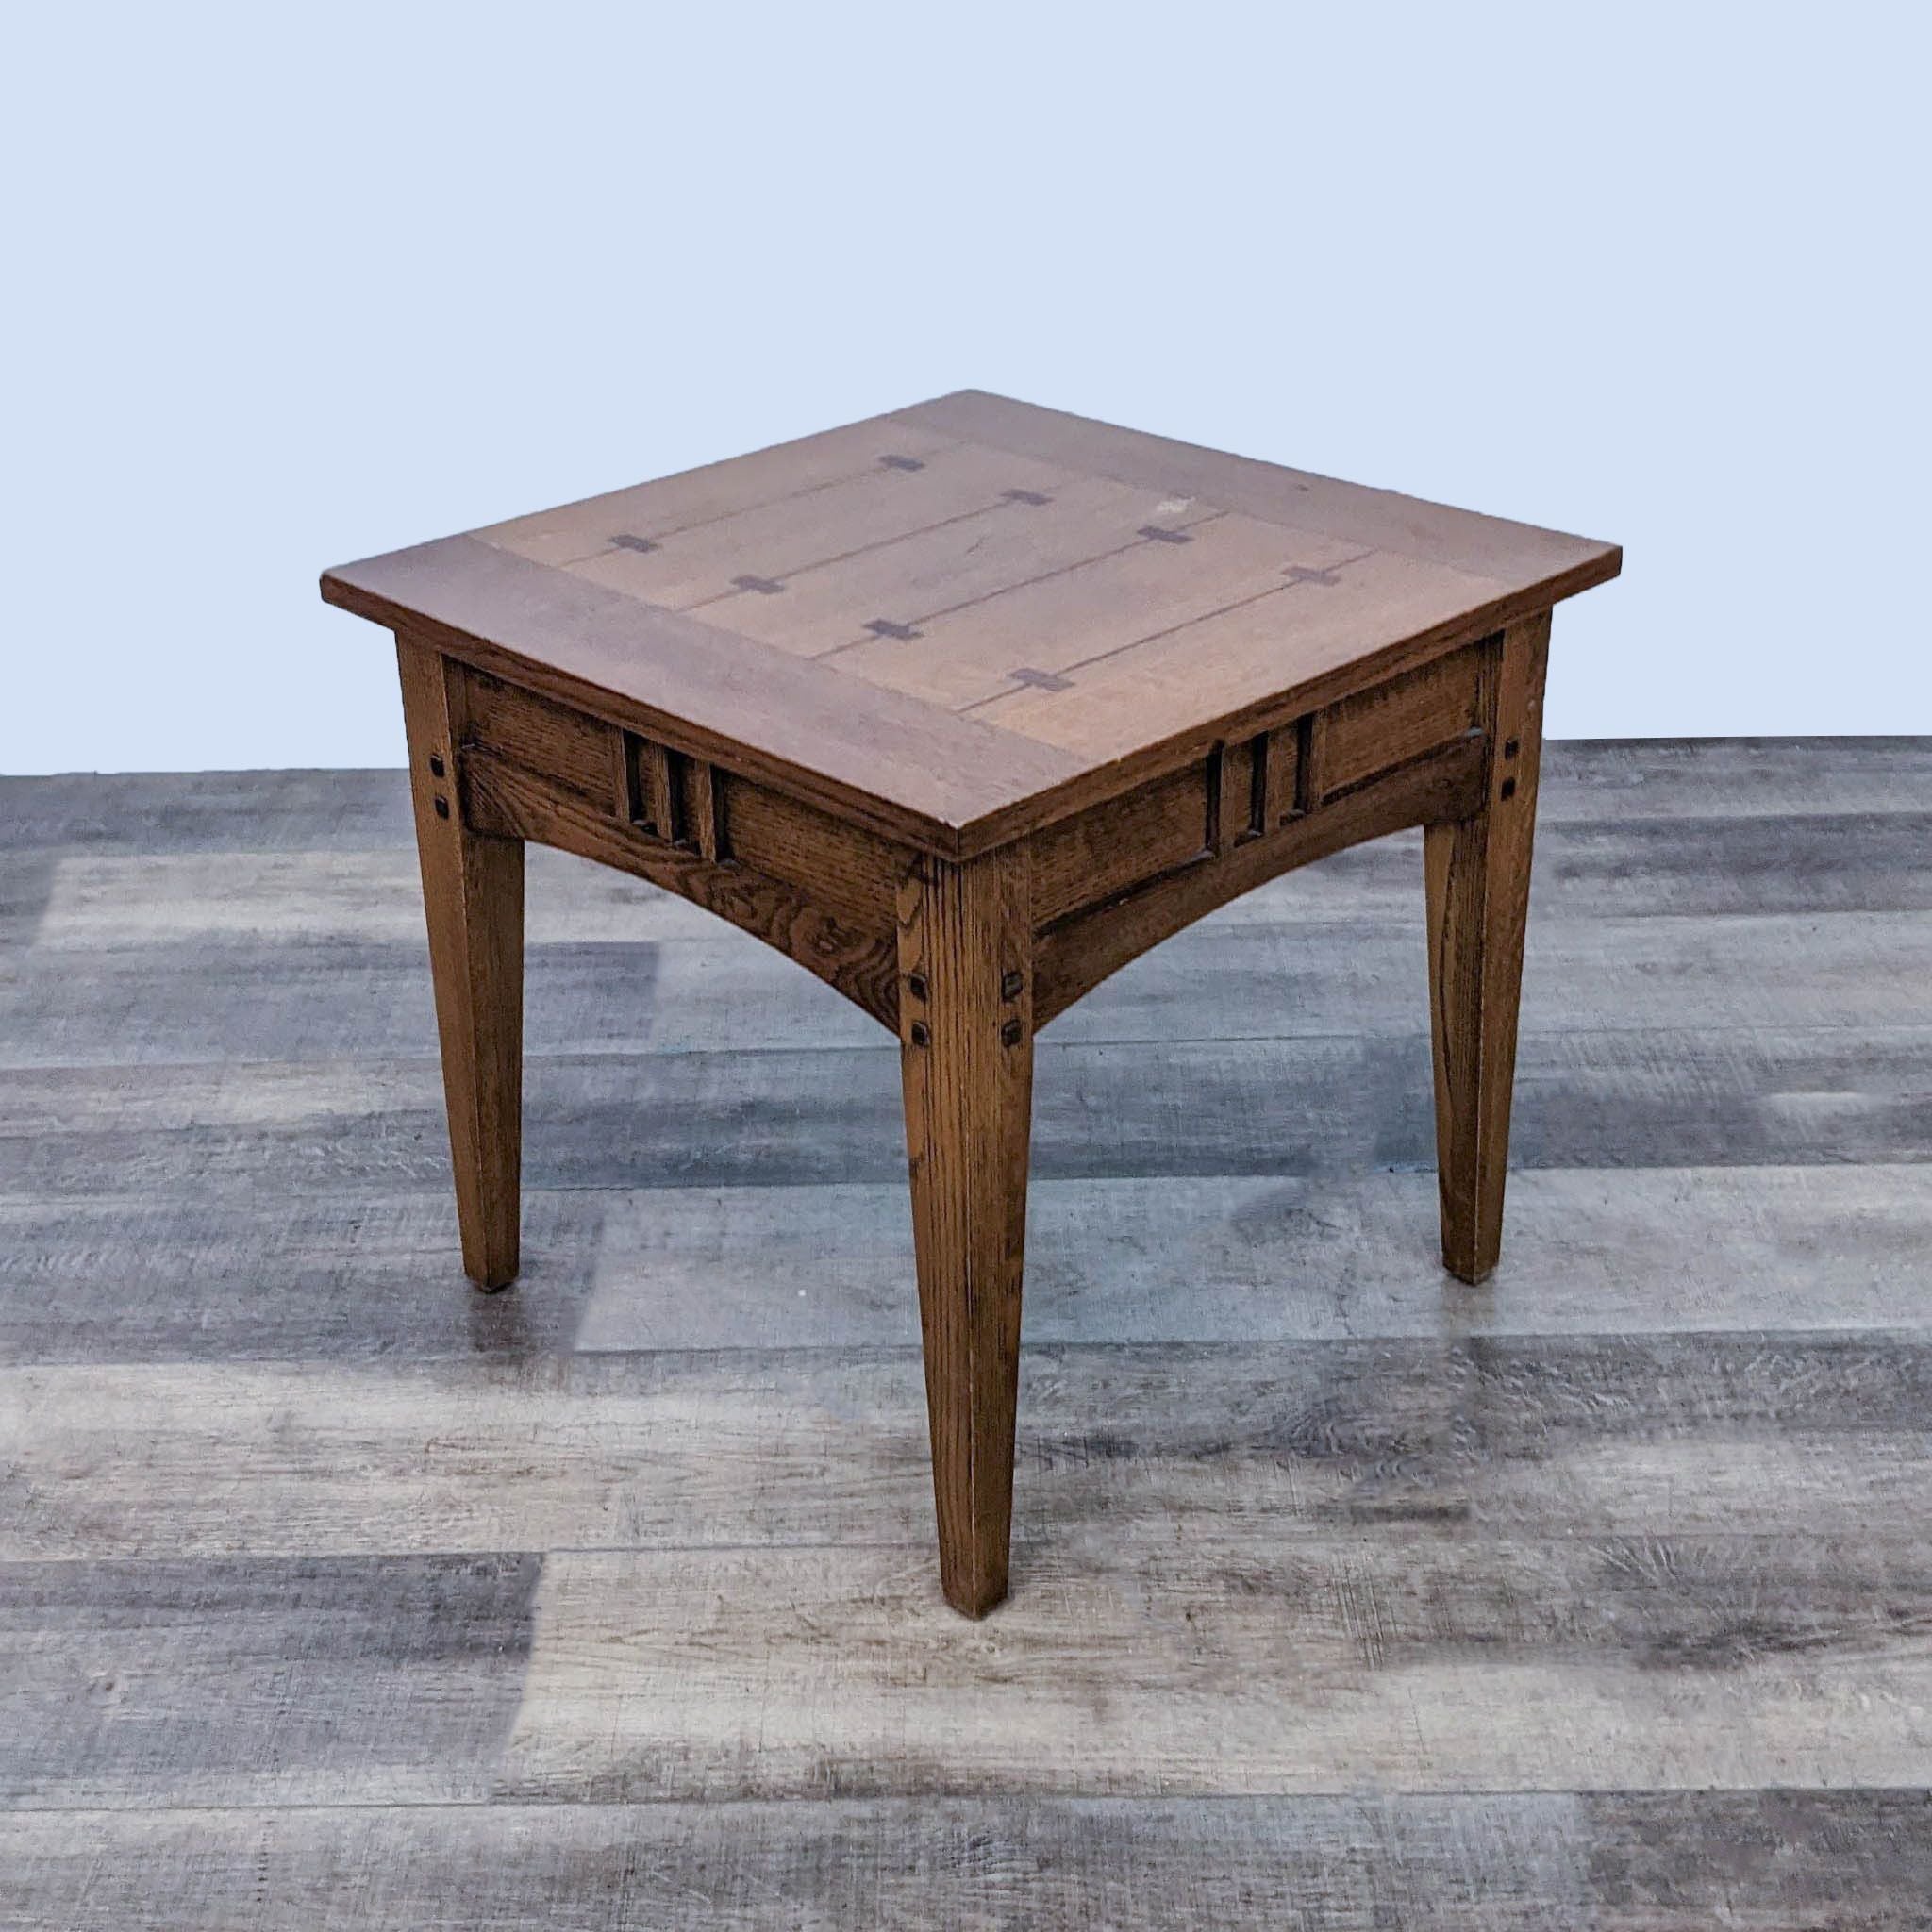 Angled view of a square oak end table by Reperch, featuring detailed inlay work, standing on a gray wood-patterned floor.